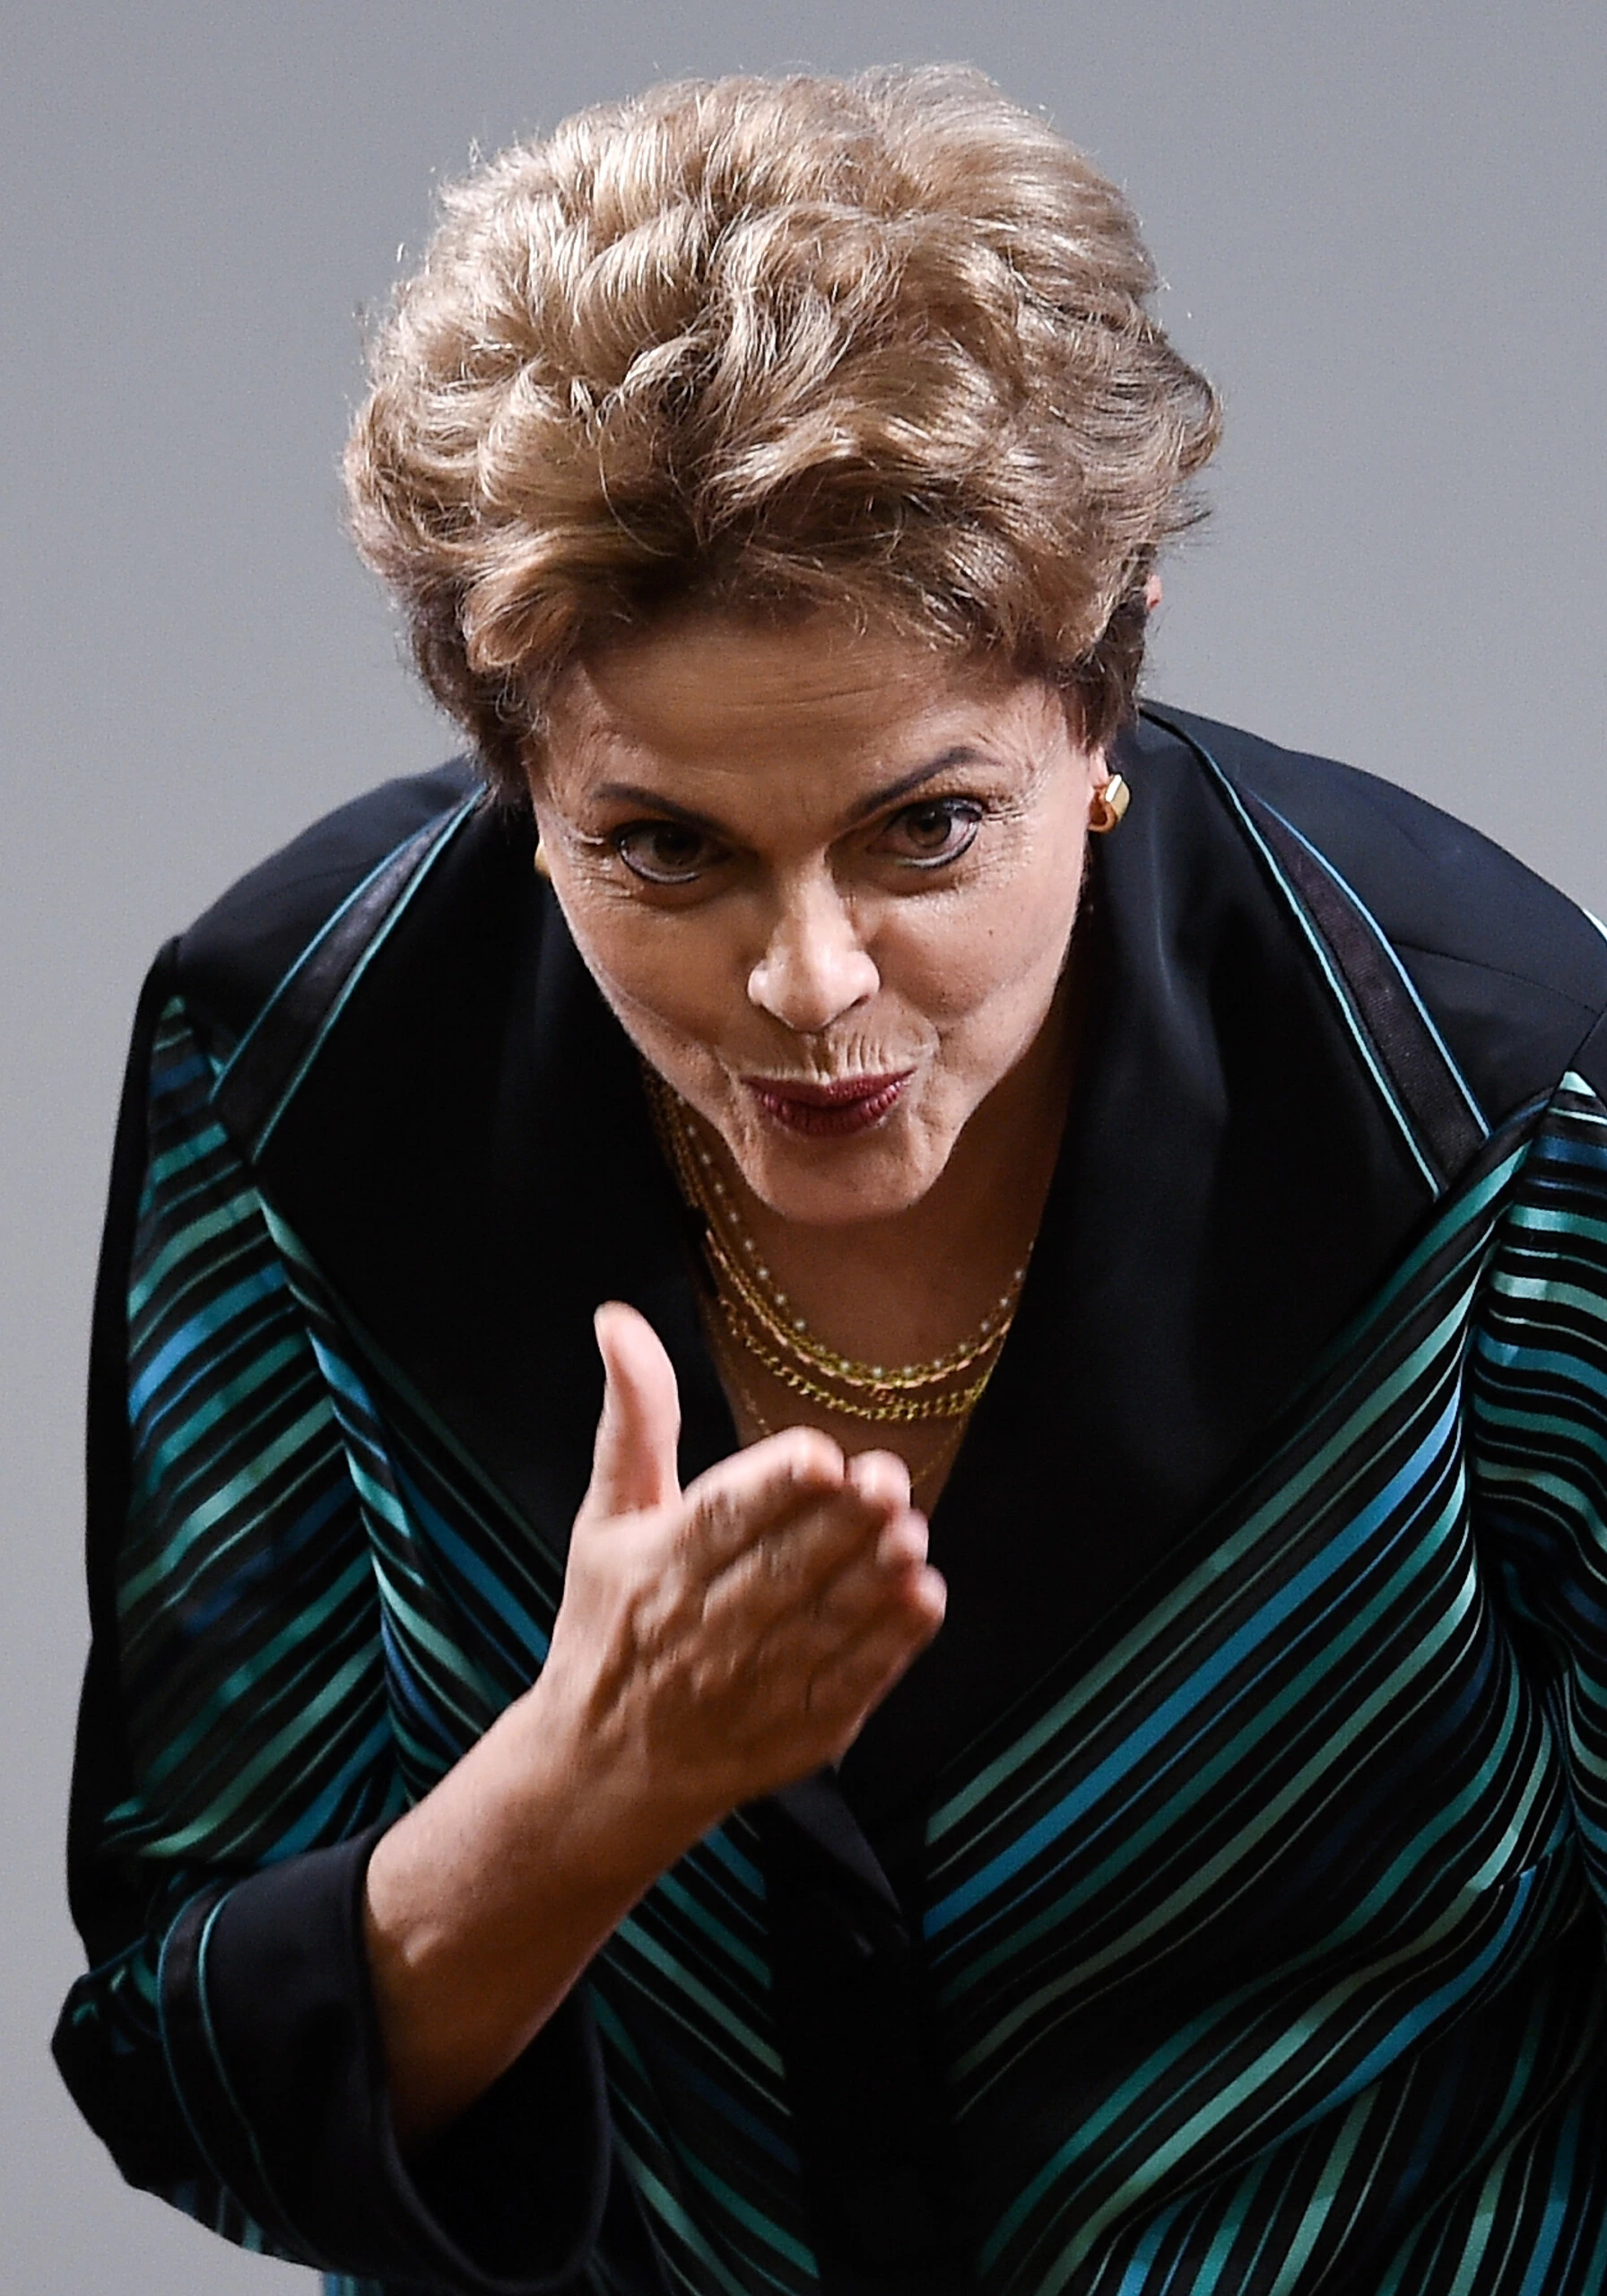 BRASILIA, BRAZIL - JULY 03:  Brazilian President Dilma Roussef gestures during a ceremony for presents the Olympic Torch and Relay Route of the Rio 2016 Olympic Games on July 3, 2015 in Brasilia, Brazil.  (Photo by Buda Mendes/Getty Images)